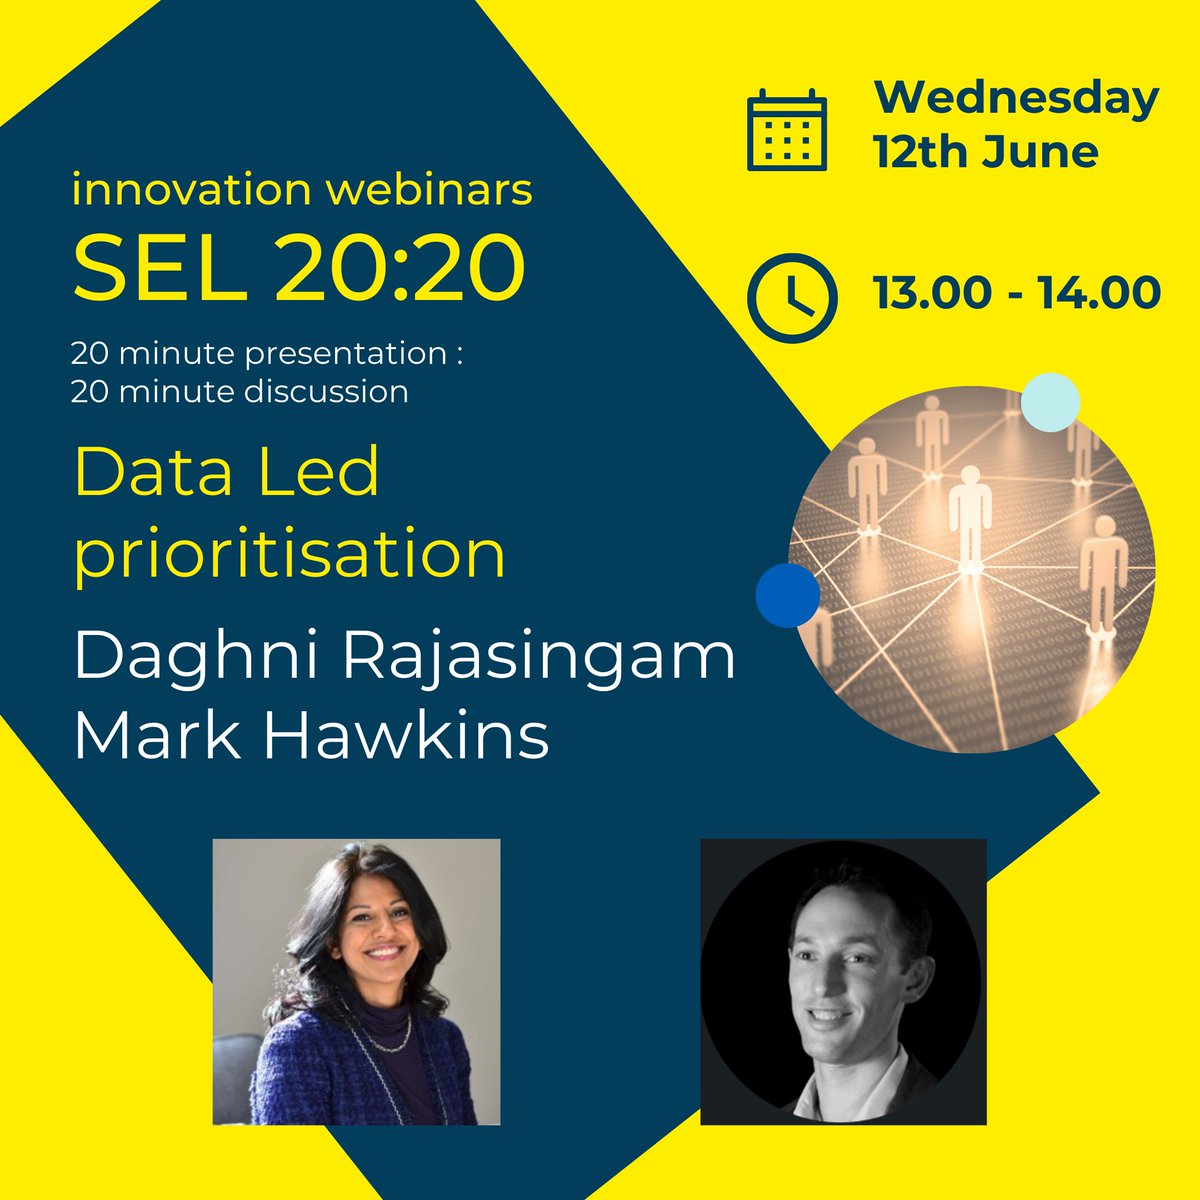 Join us on 12th June, 1-2pm, for our next #webinar on Data Led Prioritisation. See how Factor 50 and Guys’ and St Thomas’ NHS Trust improve diabetes care with data-driven solutions. Learn and join the conversation. Register now: ow.ly/1b9m50RY4hW